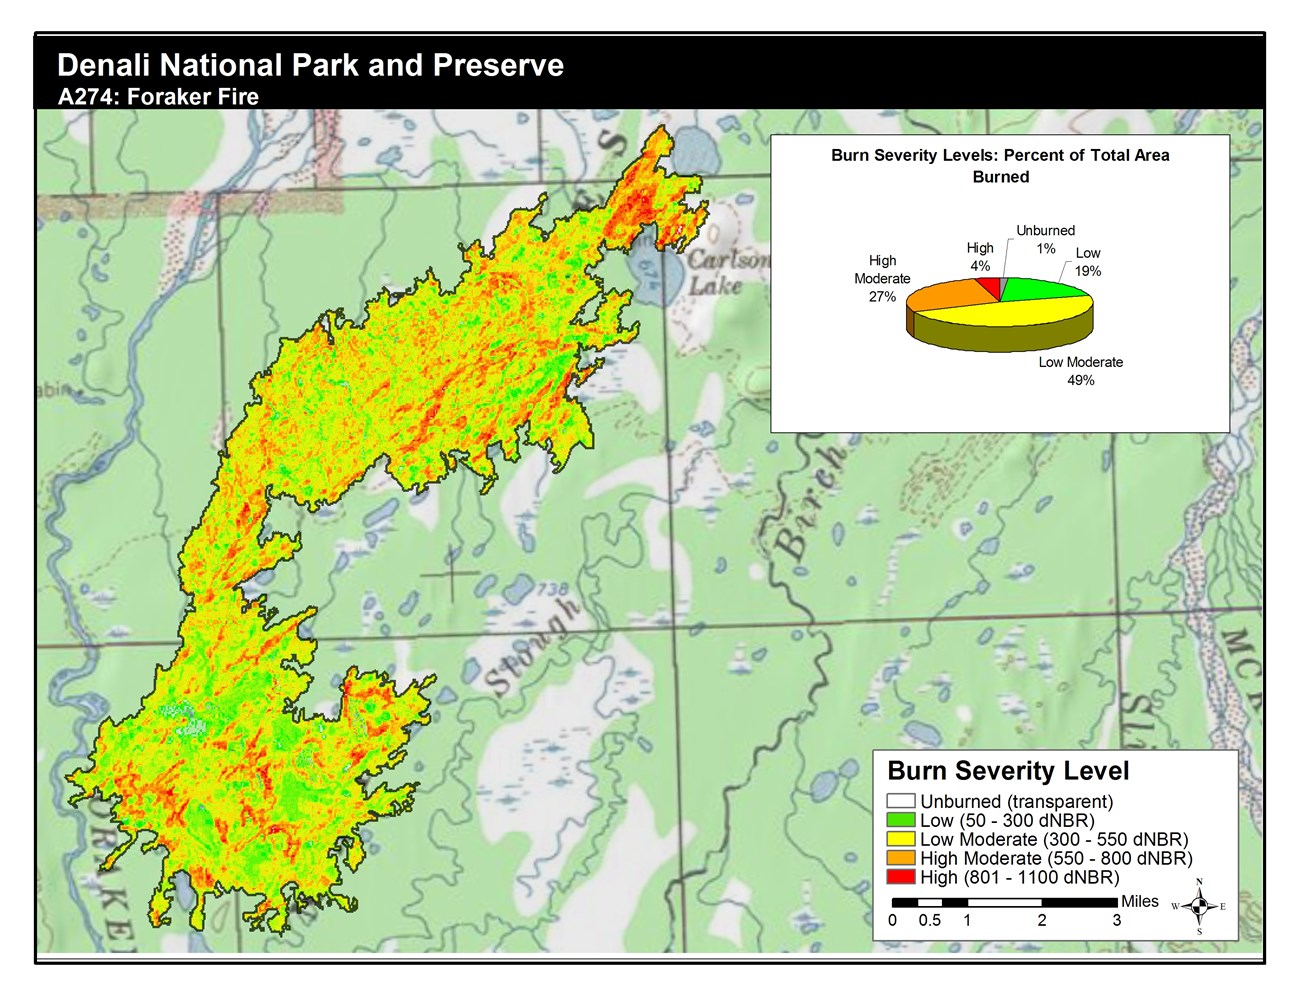 A mostly green map showing burn severity levels  with the majority of the map either in the low range or low moderate range.